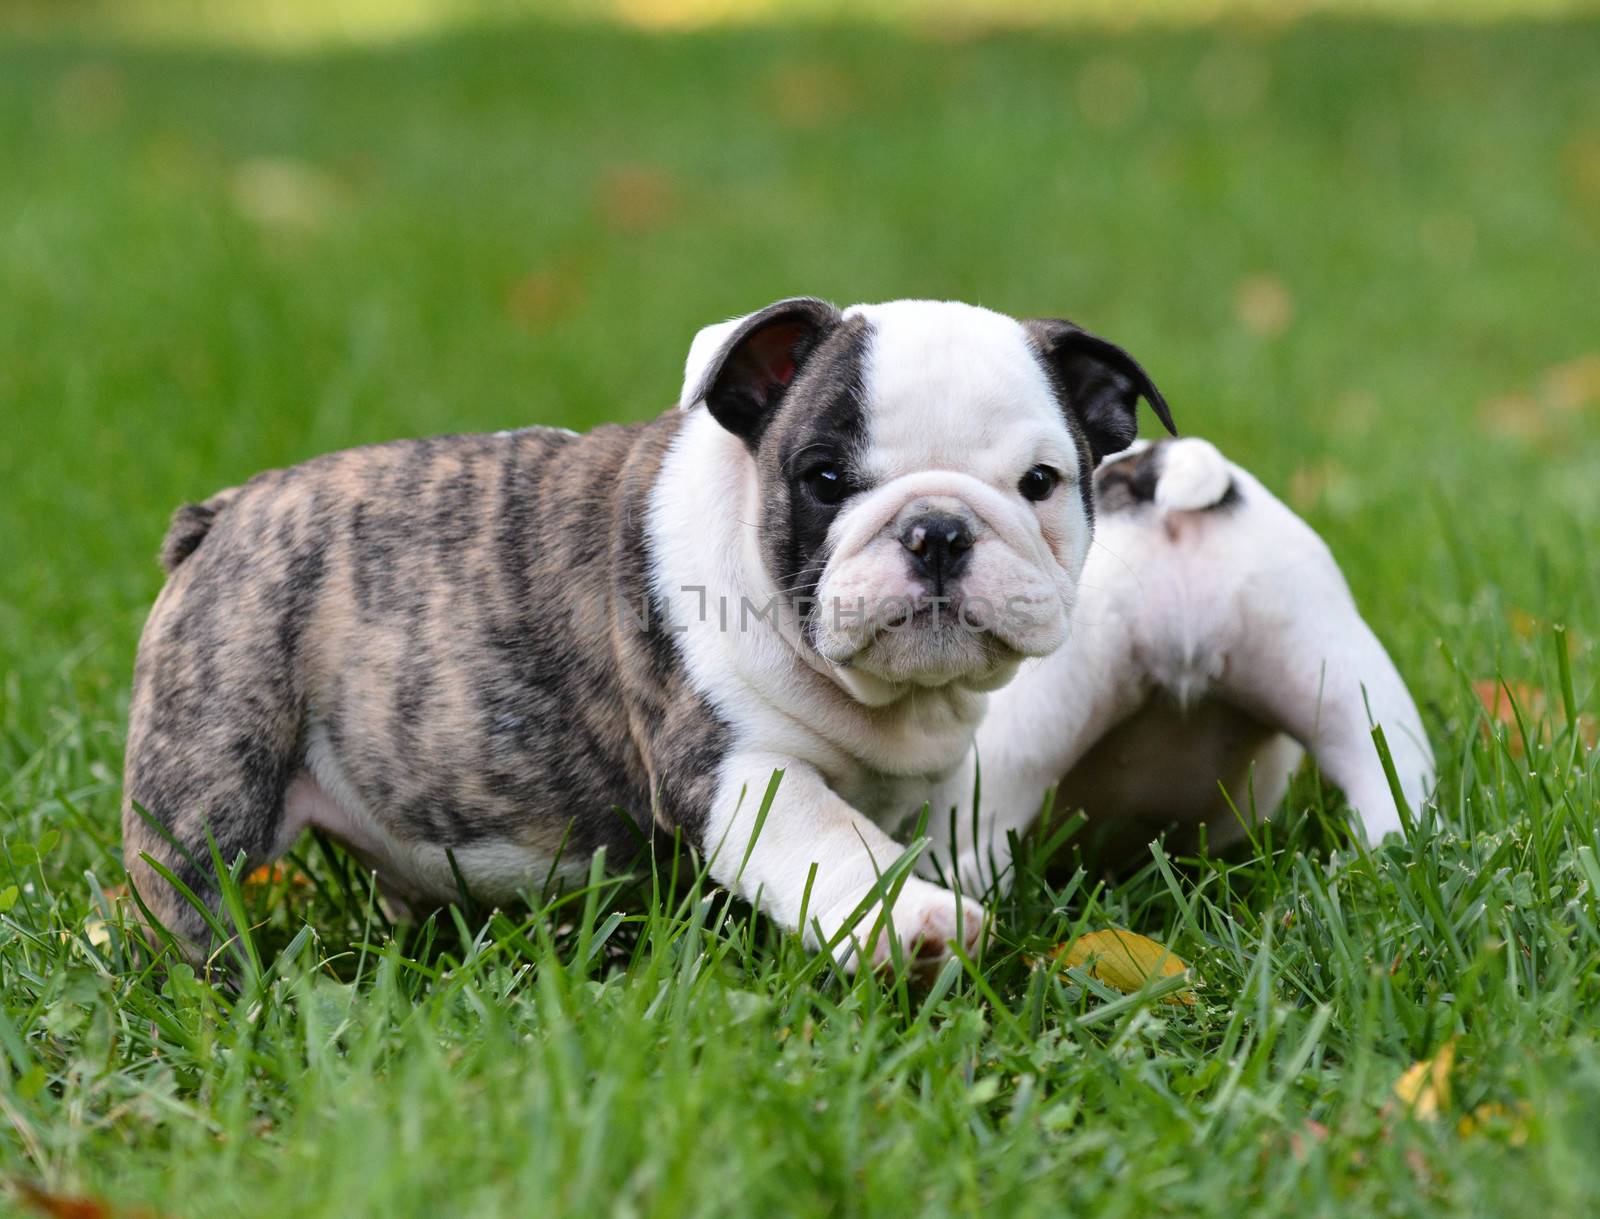 bulldog puppy playing outside 8 weeks old